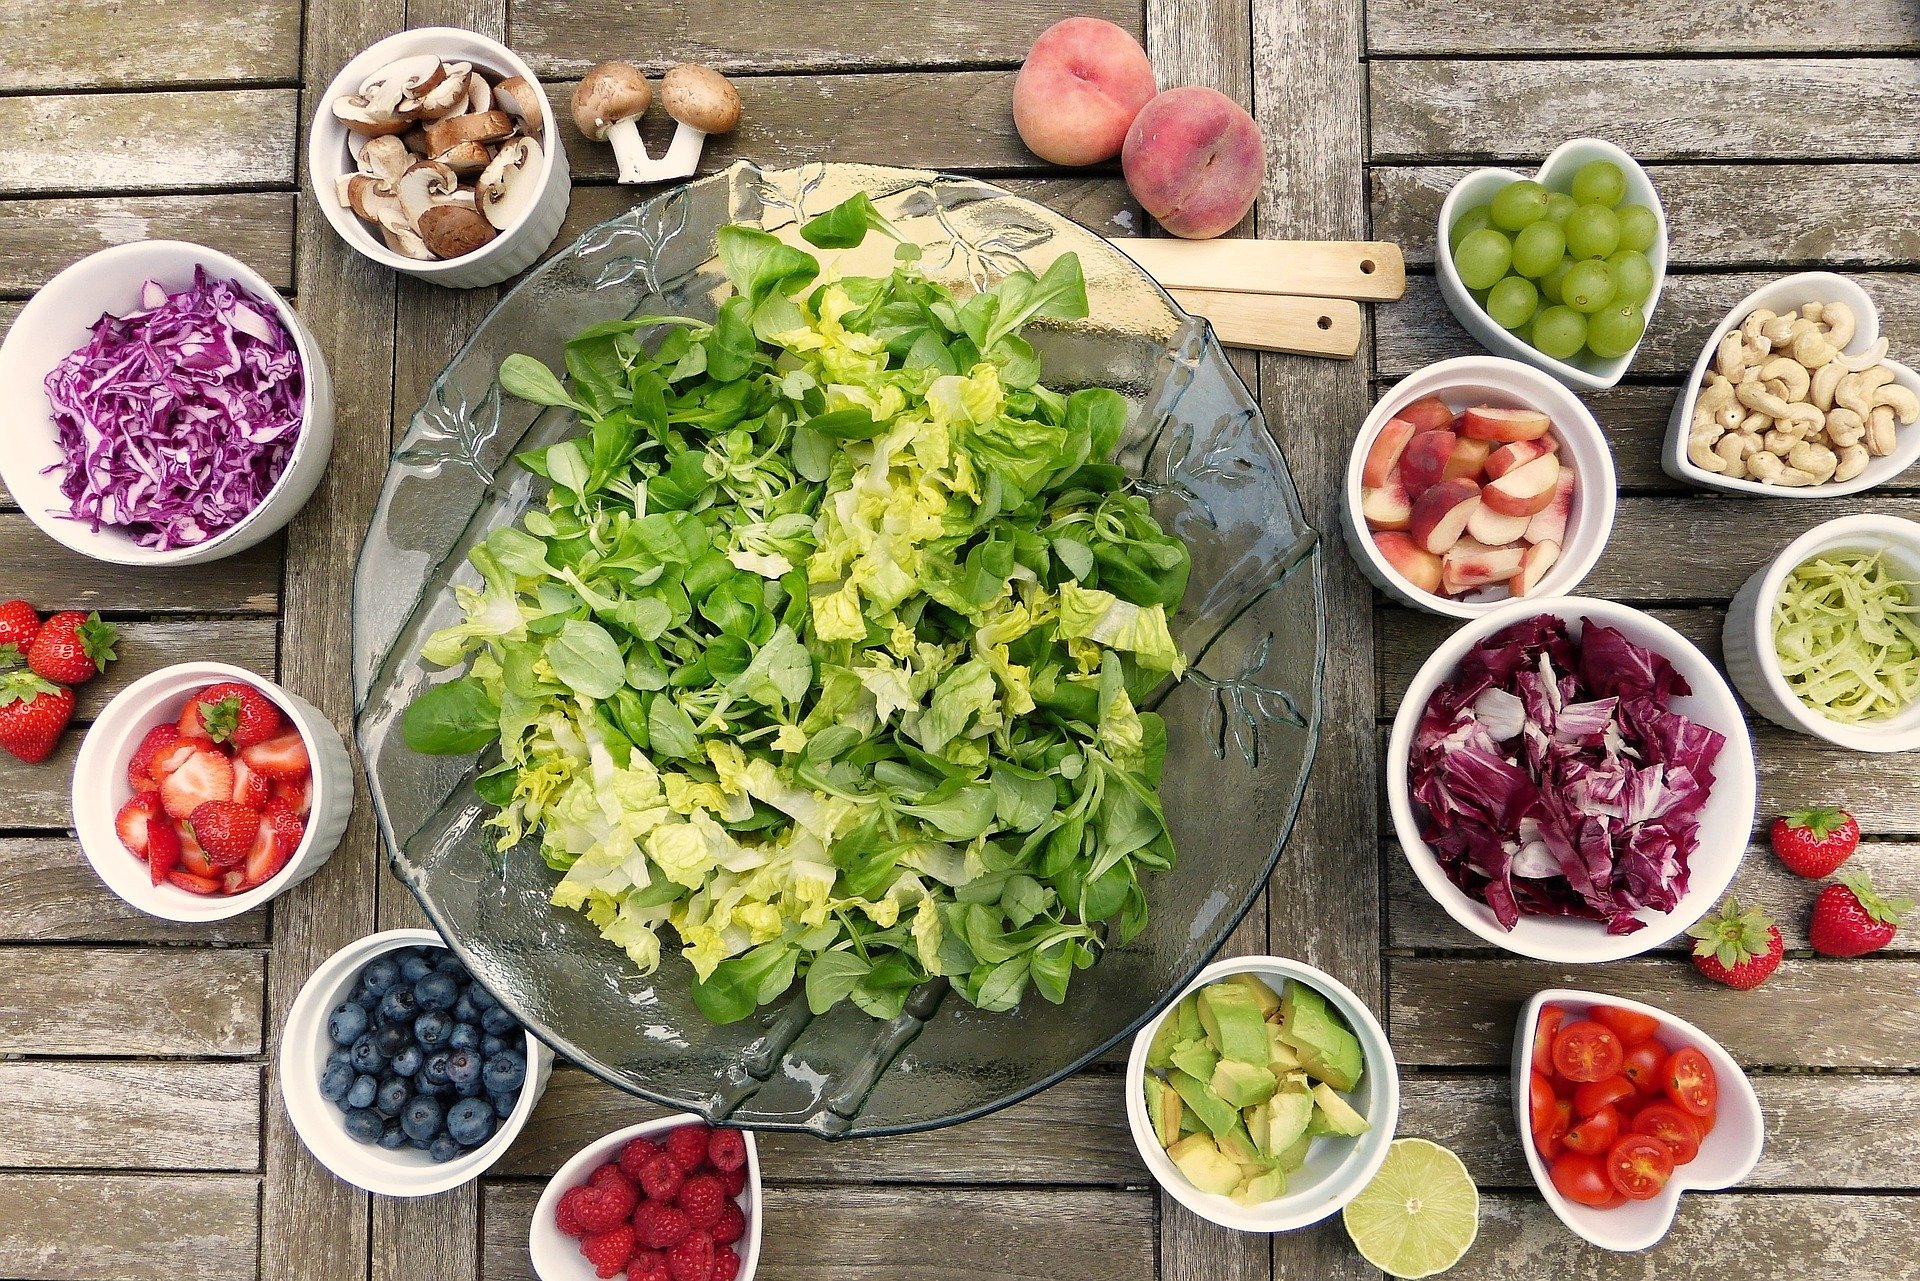 Healthy salad, vegetables on a wooden table